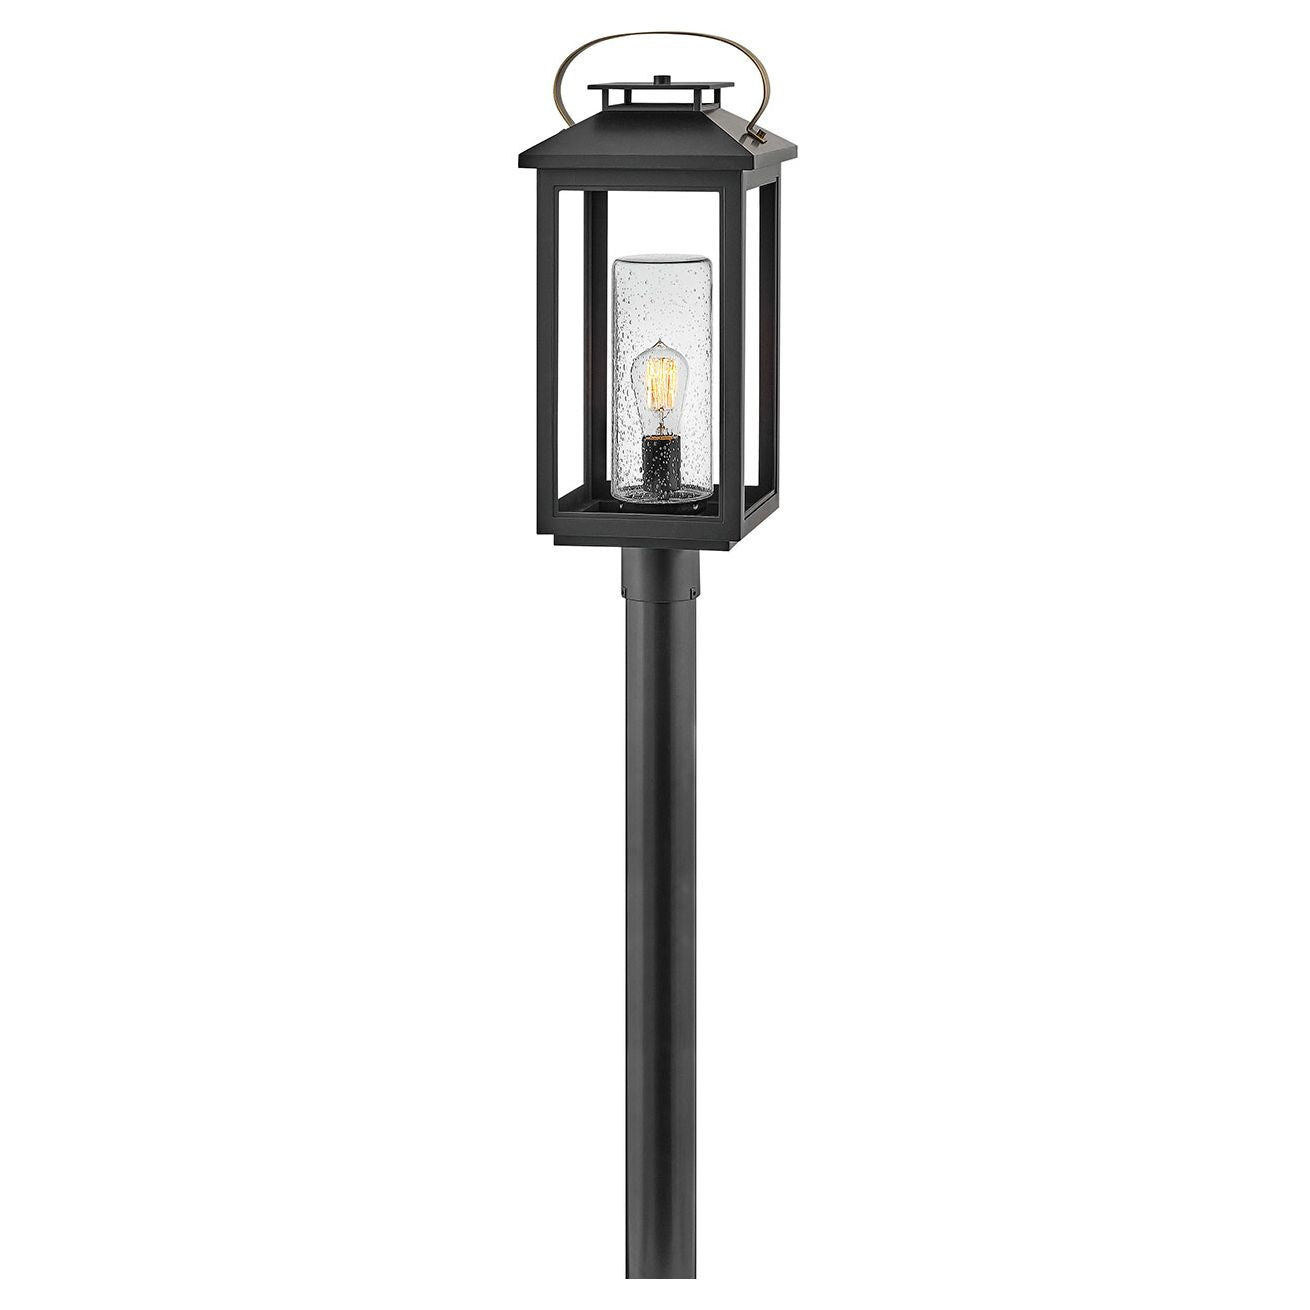 Hinkley 1161-LV - Atwater 23" Tall Post or Pier Mount Lantern, Low Voltage